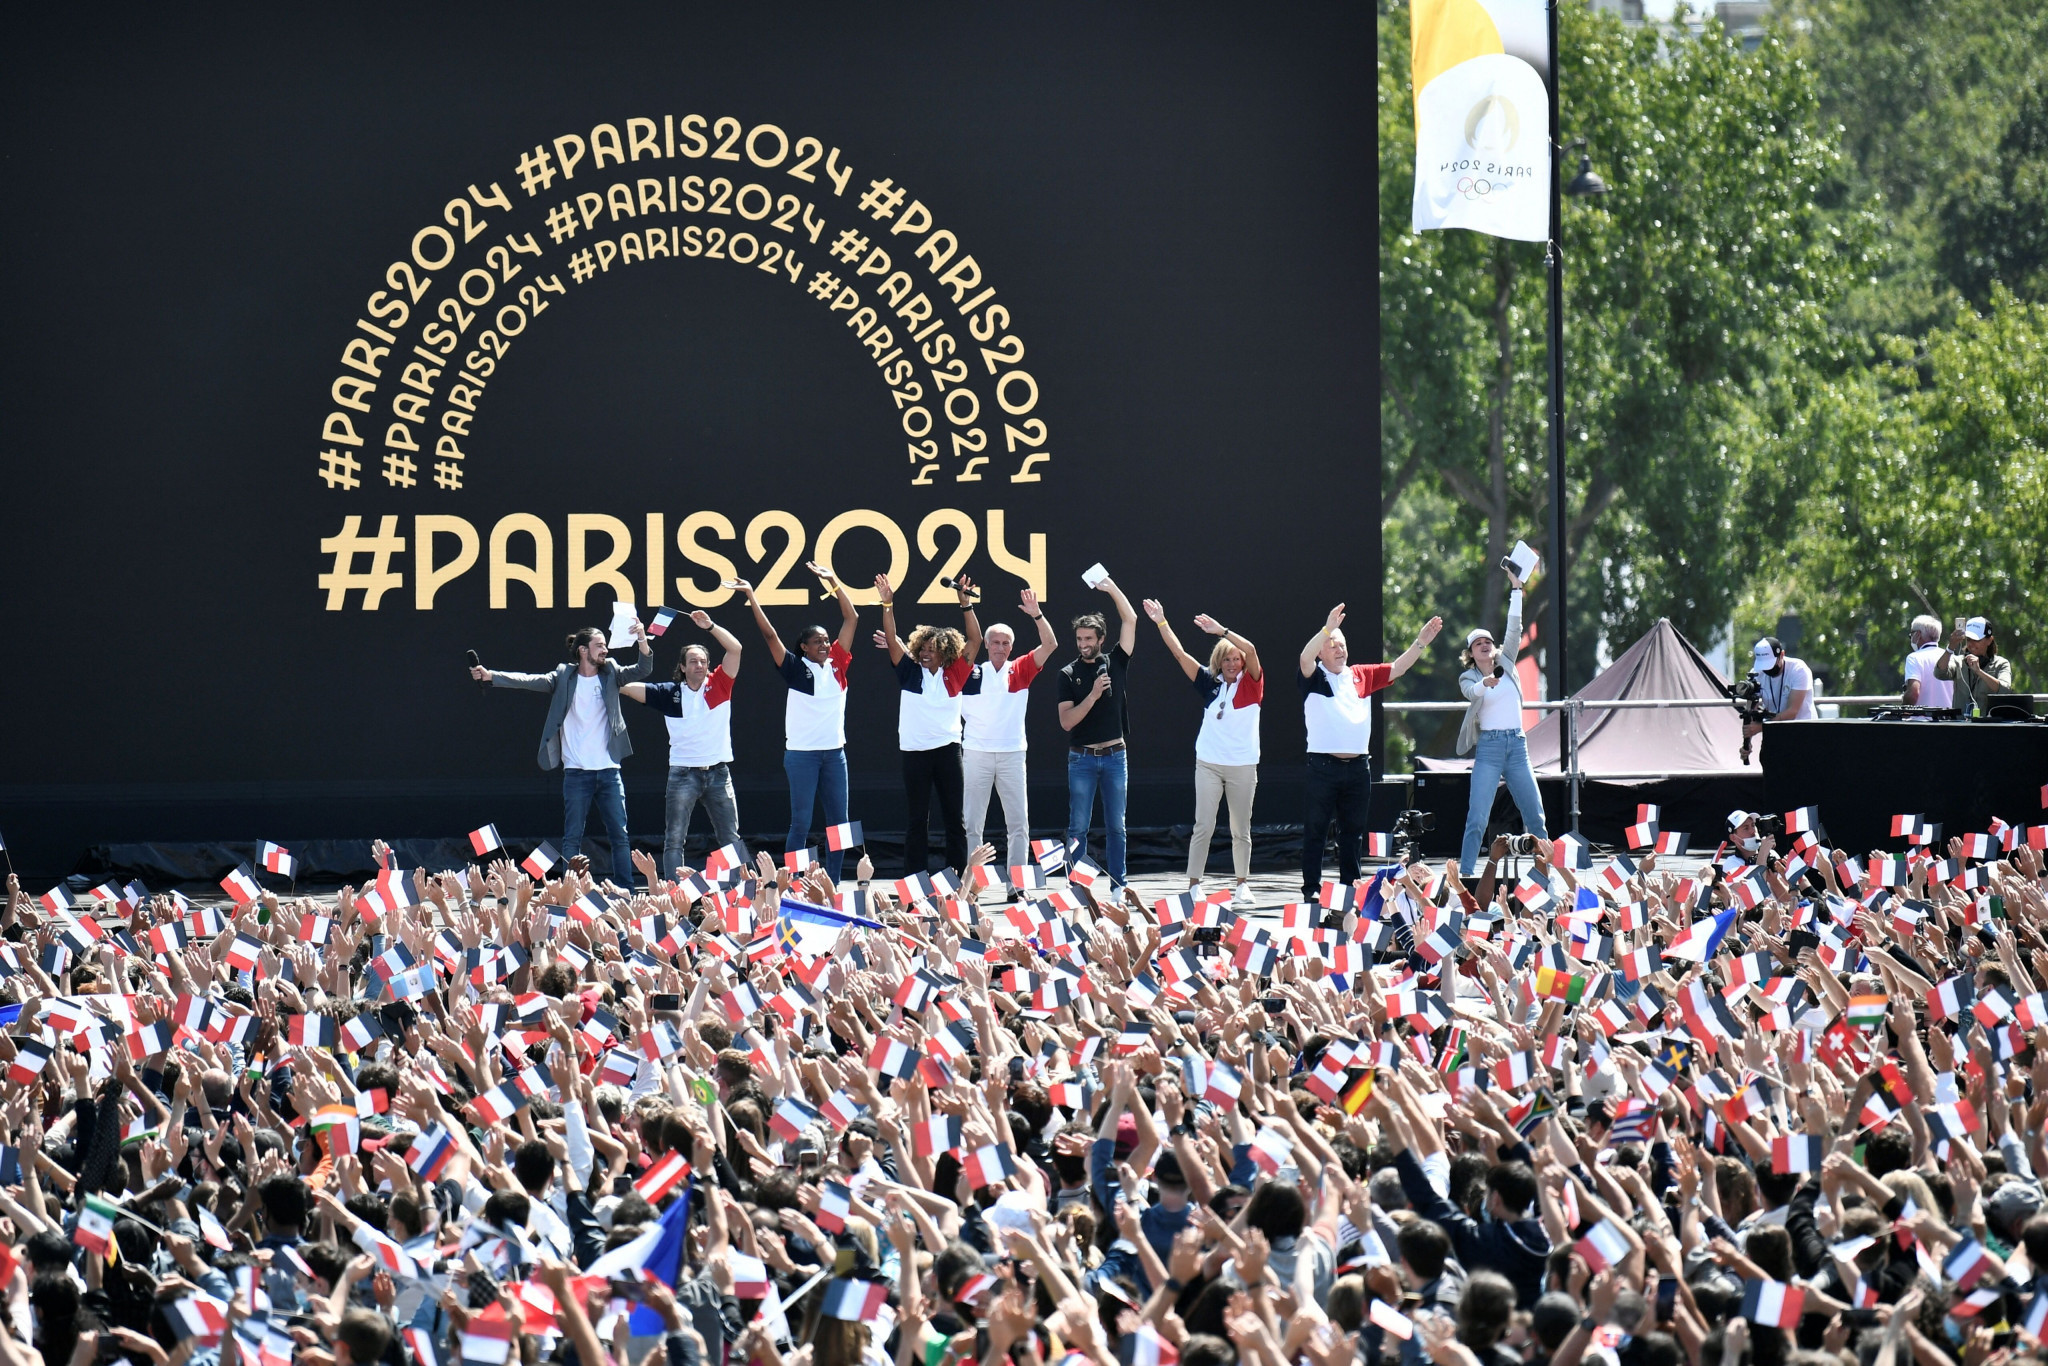 Paris is due to stage the next Olympics in 2024 ©Getty Images